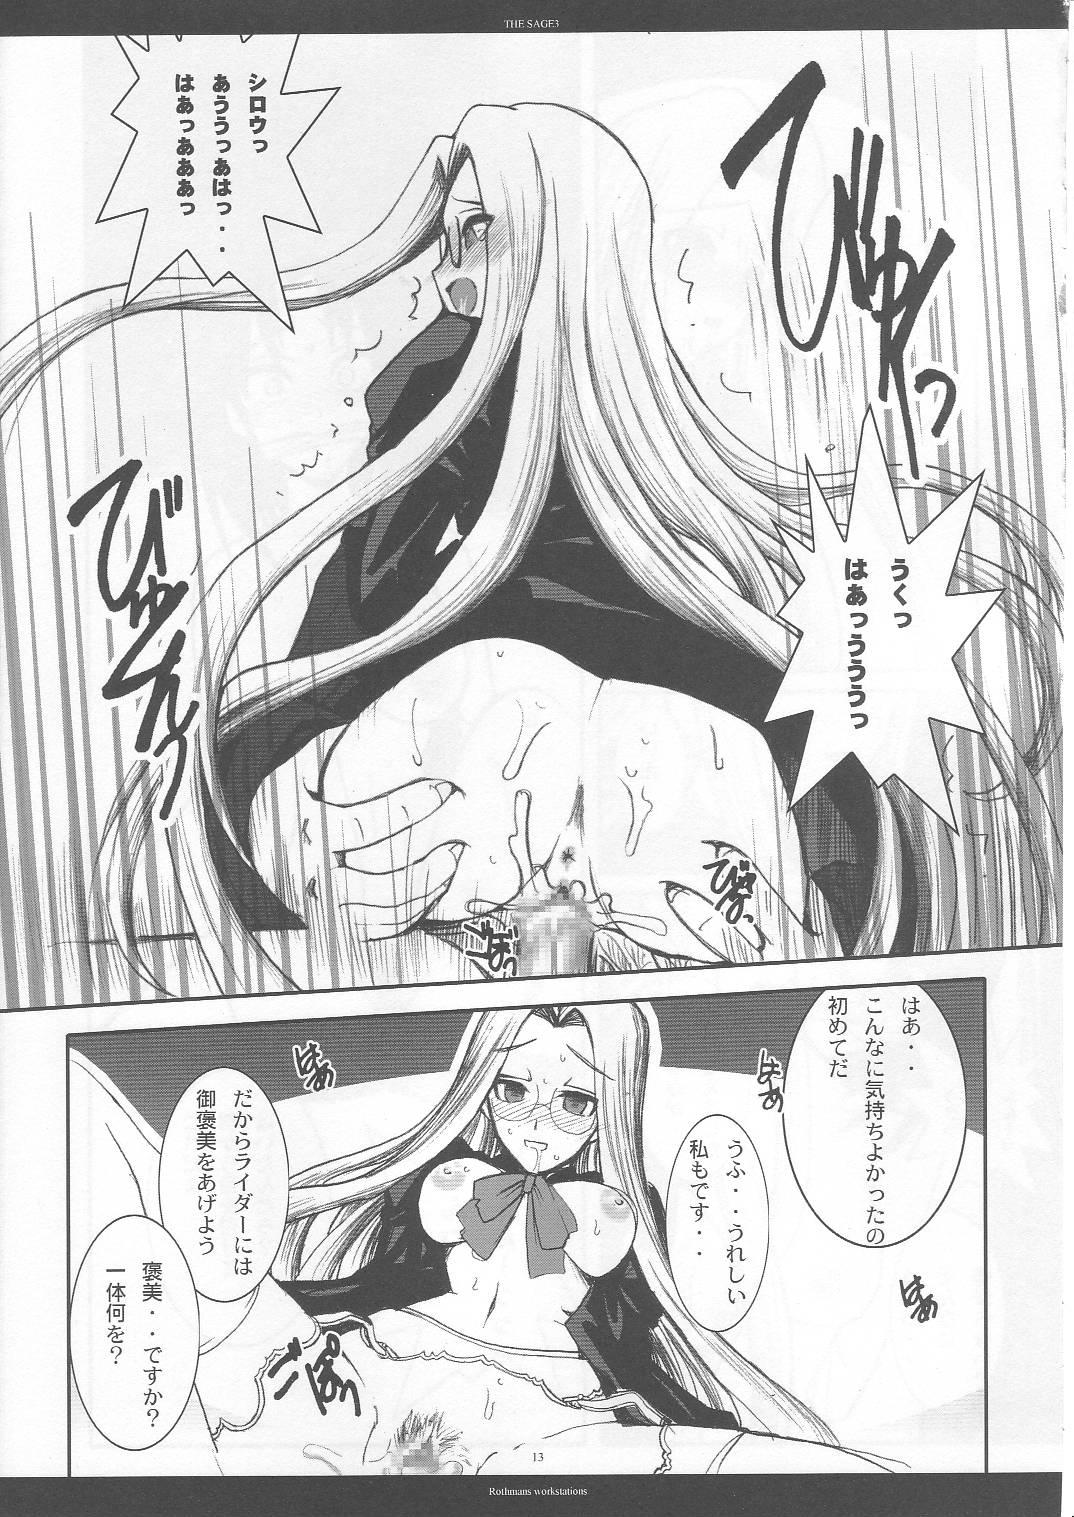 Fetish THE SAGE 3 - Fate stay night Soloboy - Page 12